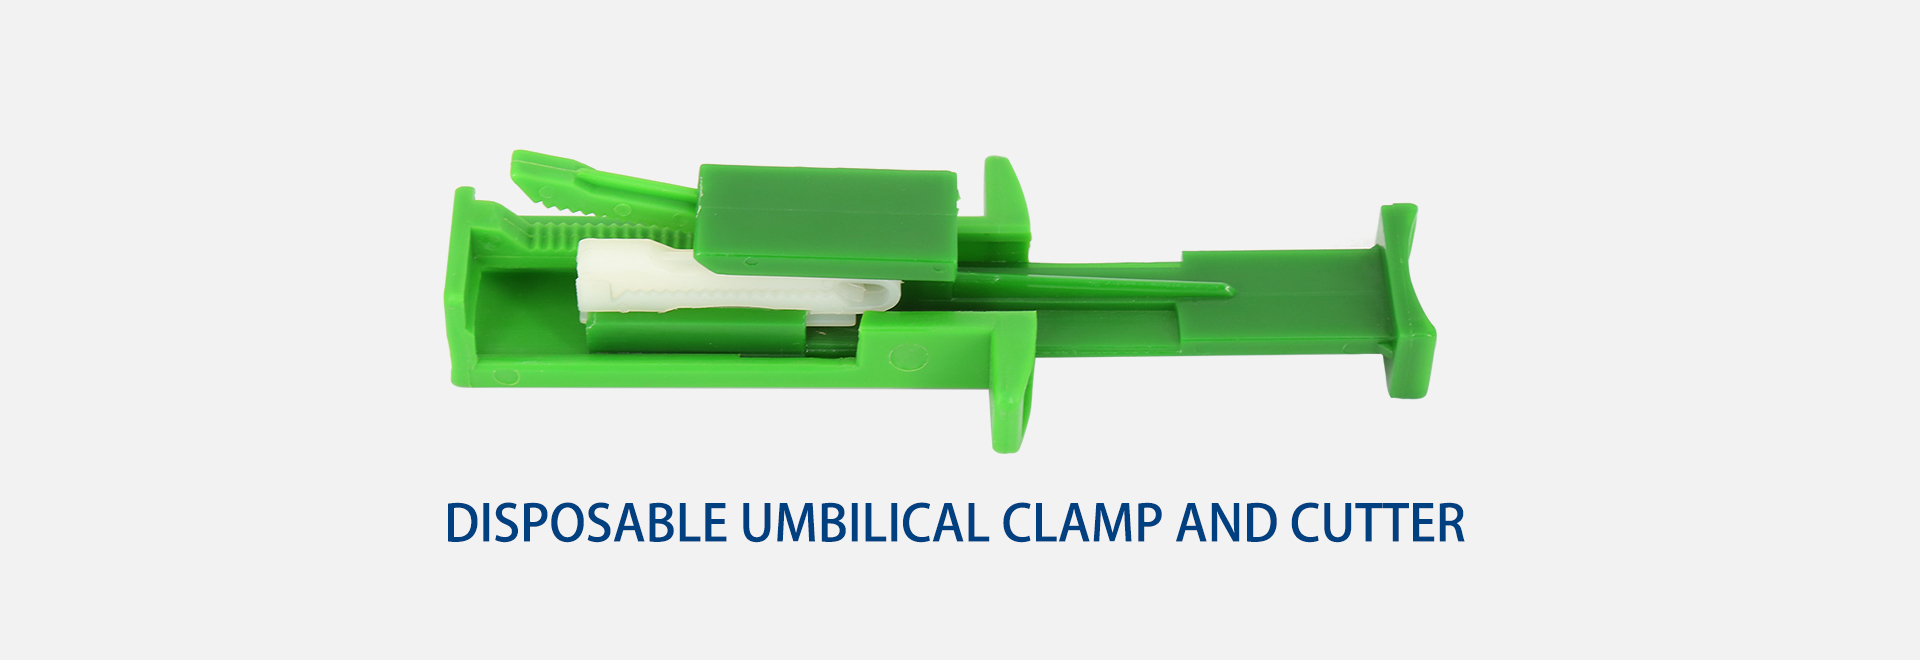 Umbilical Clamp and Cutter